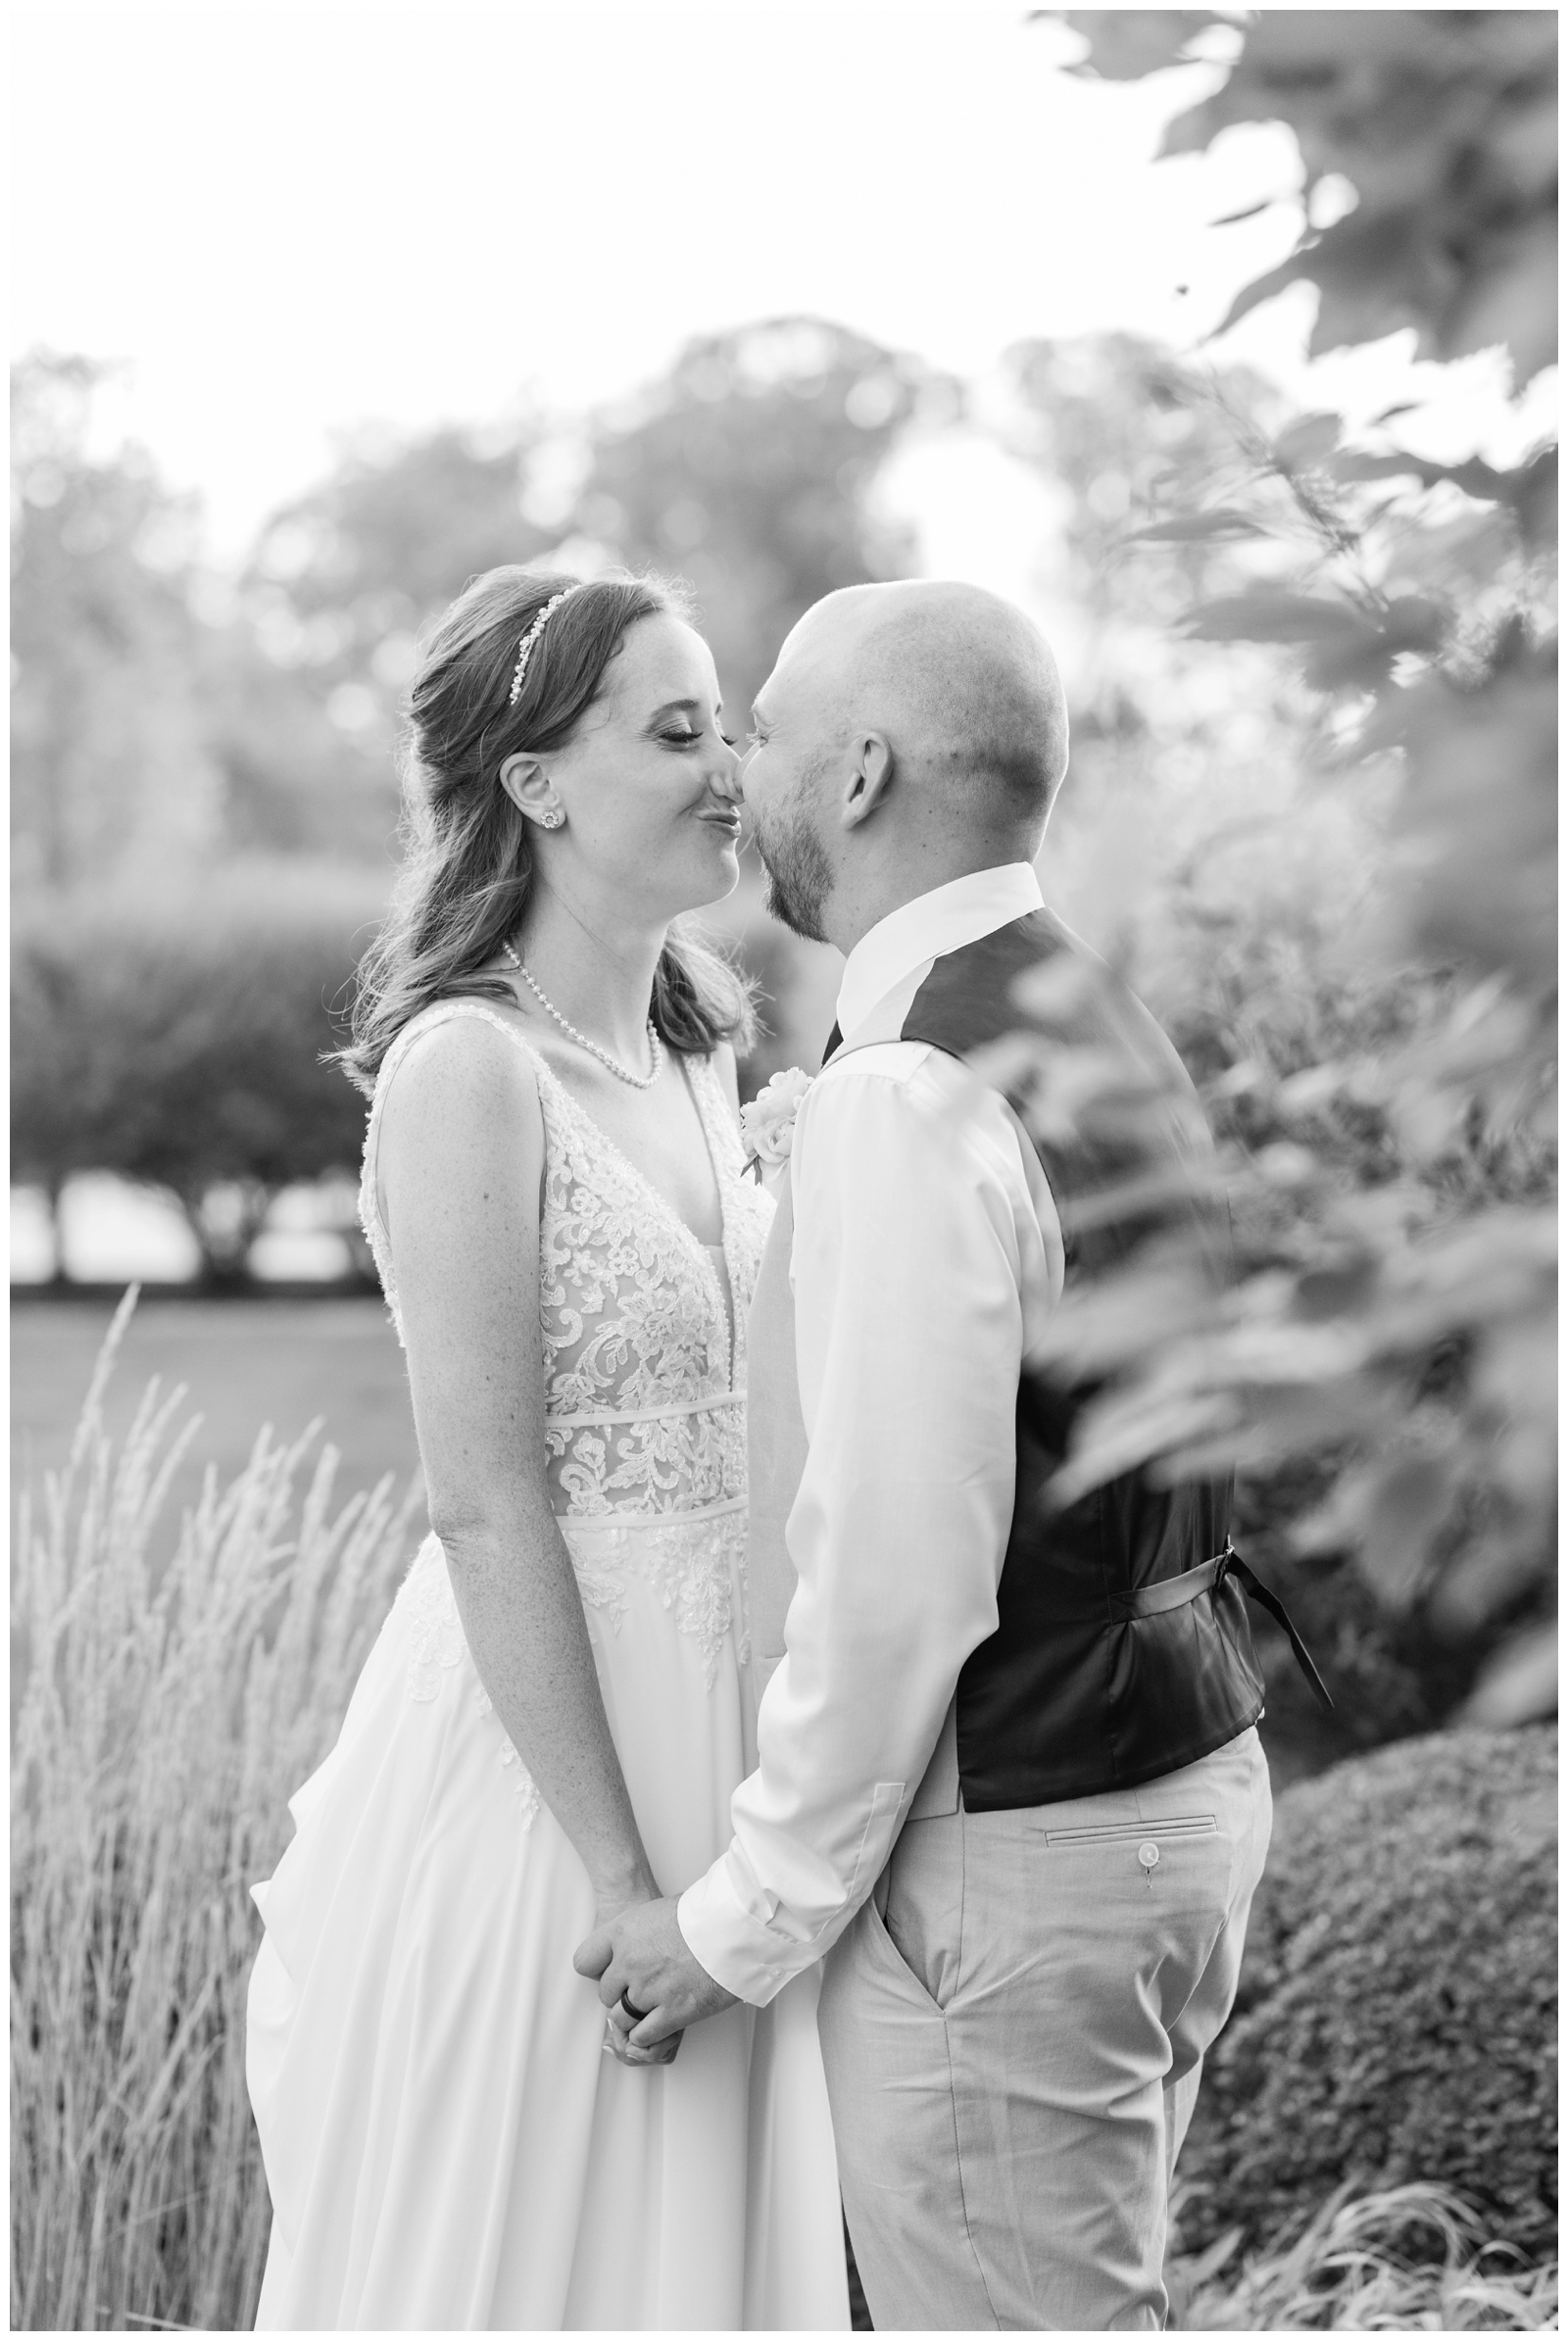 newlyweds smush noses and laugh during wedding portraits in Ohio